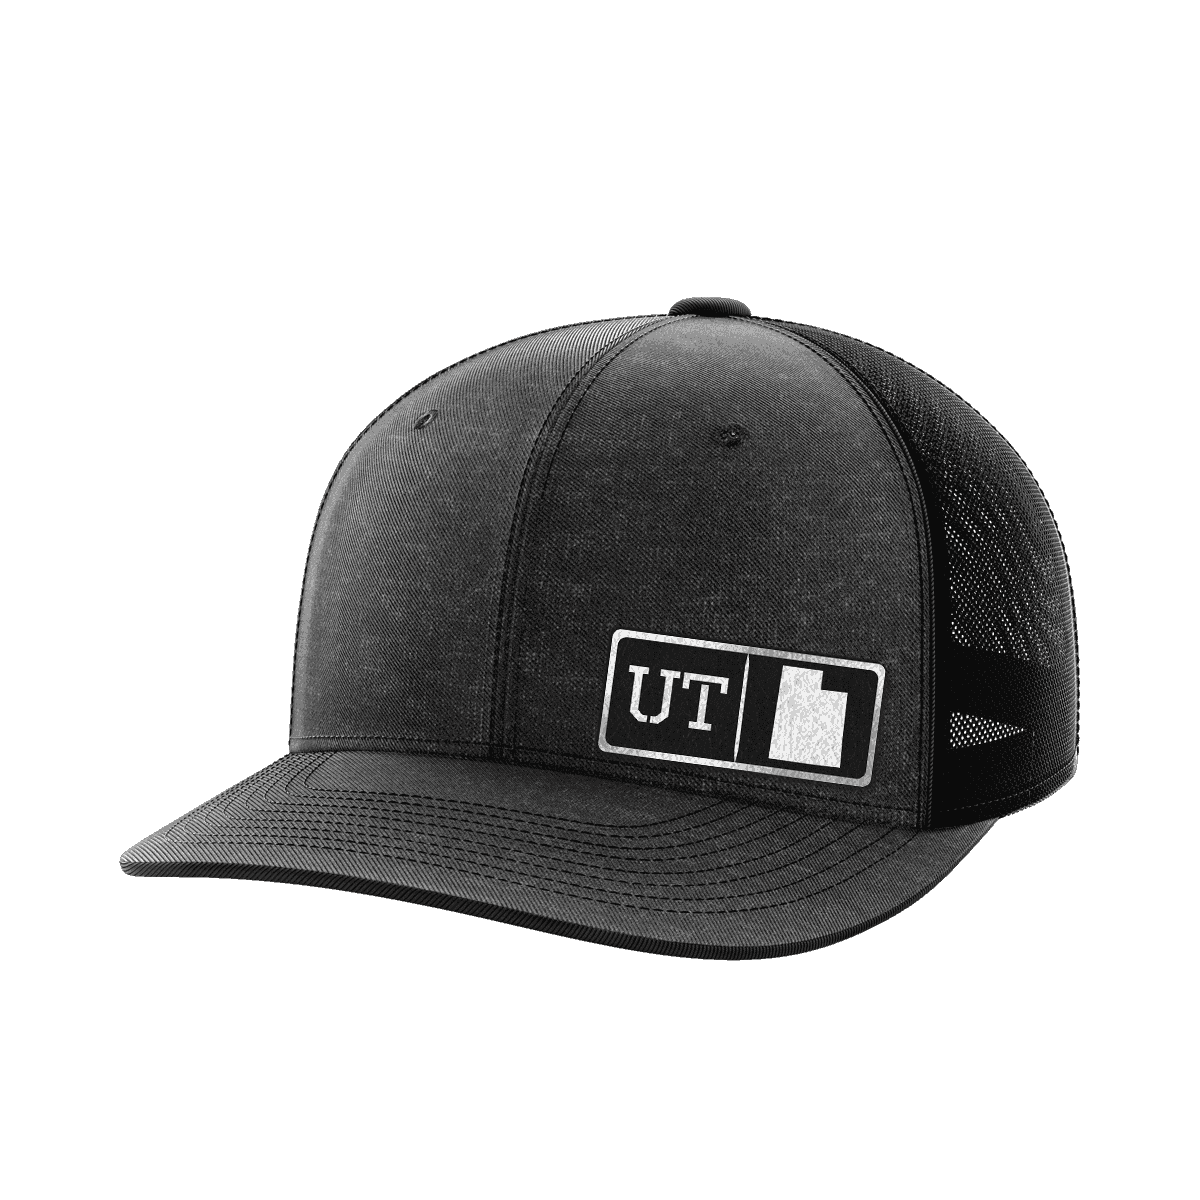 Utah Homegrown Collection (black leather)